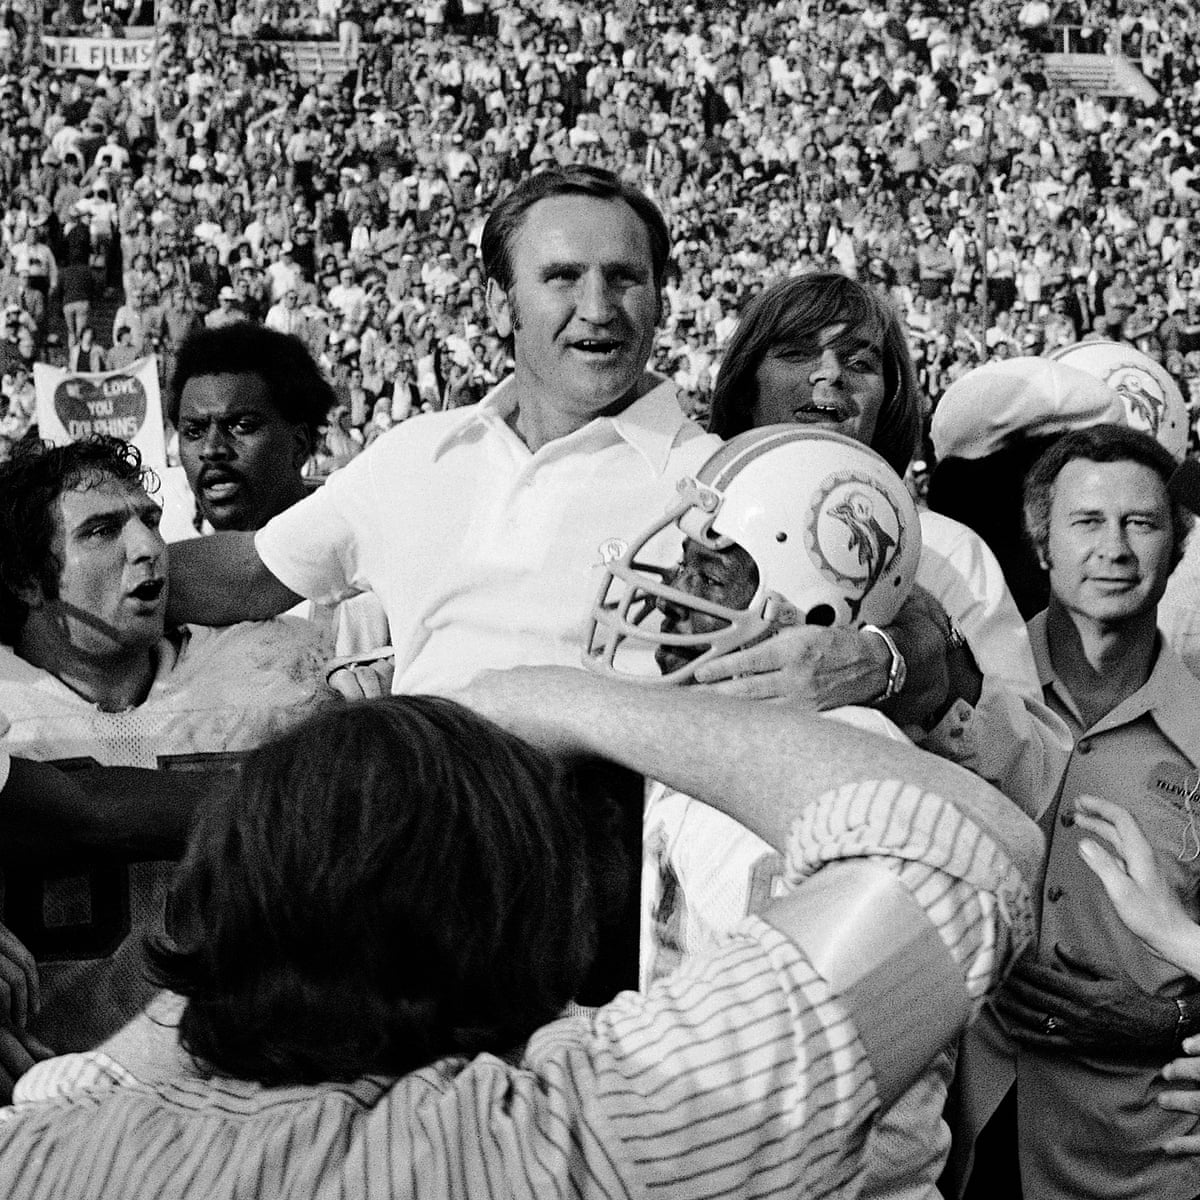 50 years on, the 1972 Miami Dolphins' undefeated season remains undefeated, Miami Dolphins